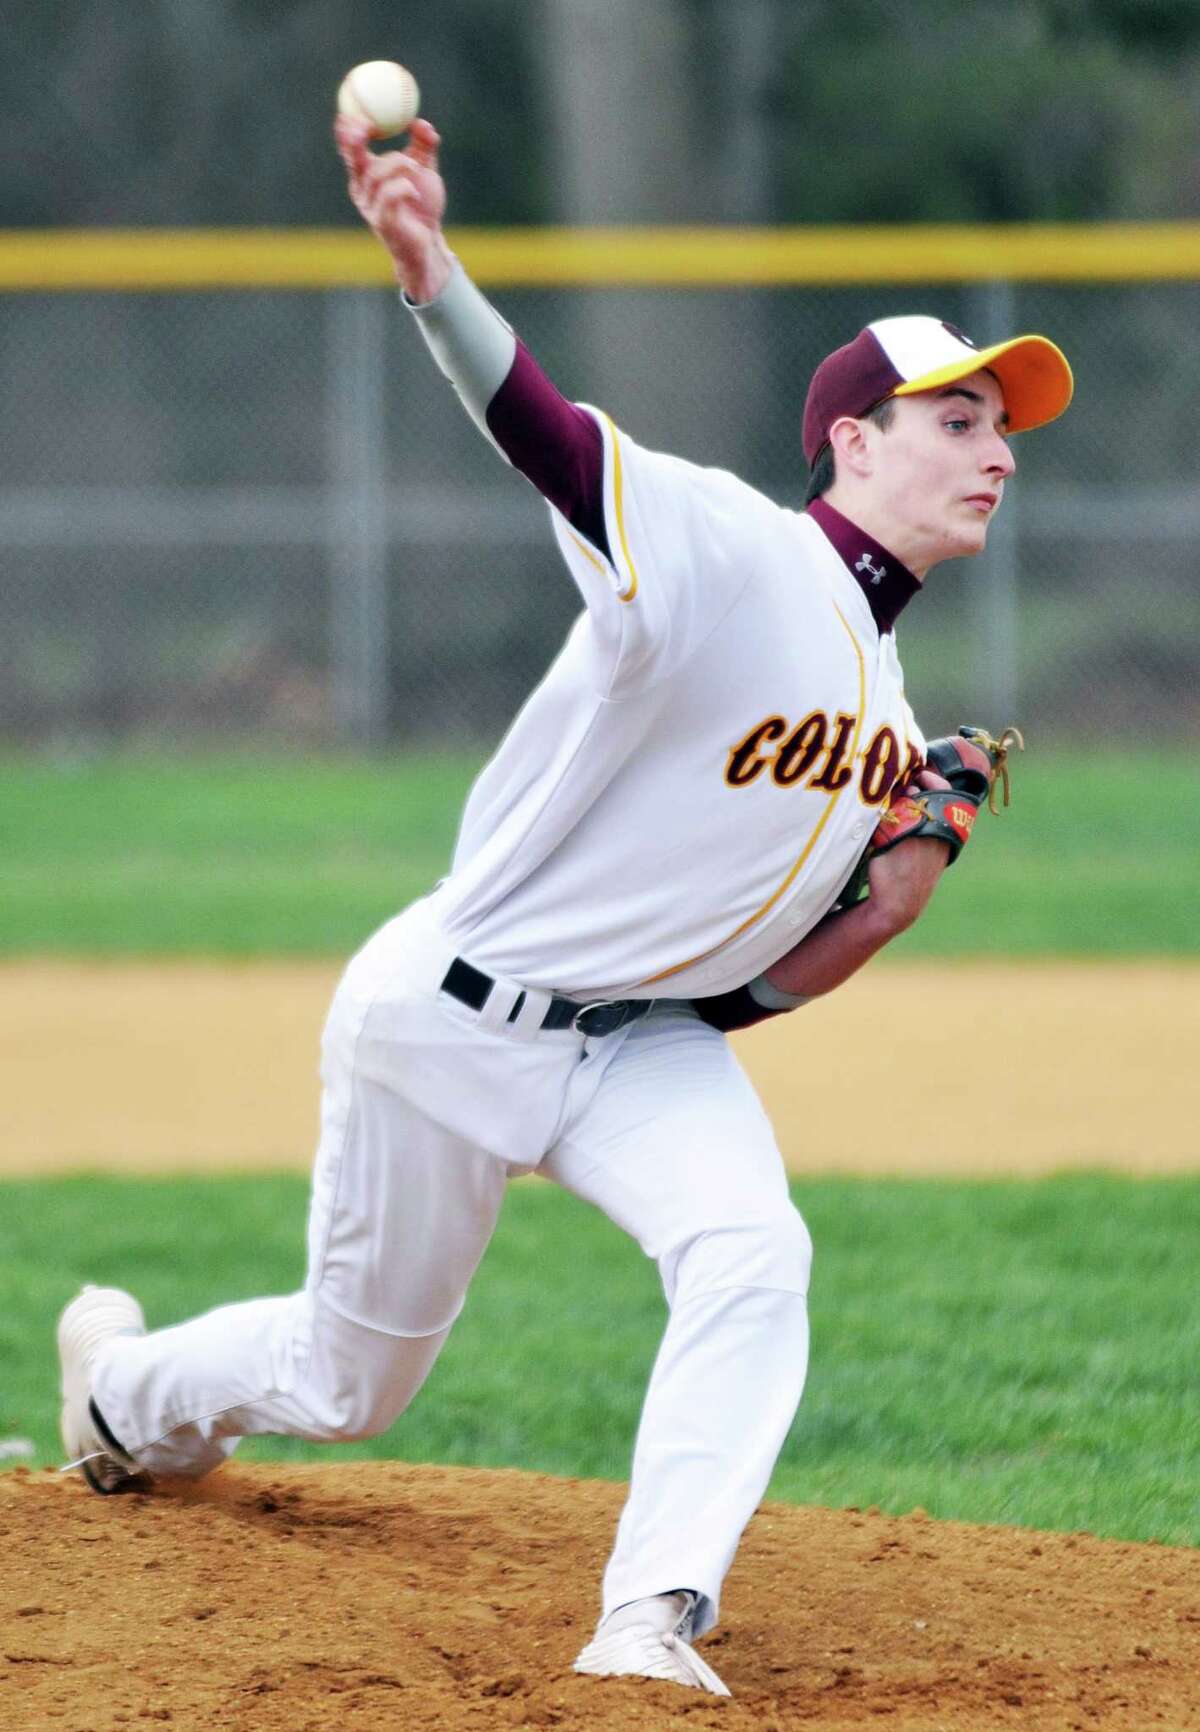 Ryan Lambert, Sr., P, Colonie: The 2016 Suburban Council Pitcher of the Year garnered a Times Union first-team nod after going 7-1 with a 1.68 earned-run average in 2016. The right-hander is headed to Binghamton University. (Brittany Gregory / Special to the Times Union)